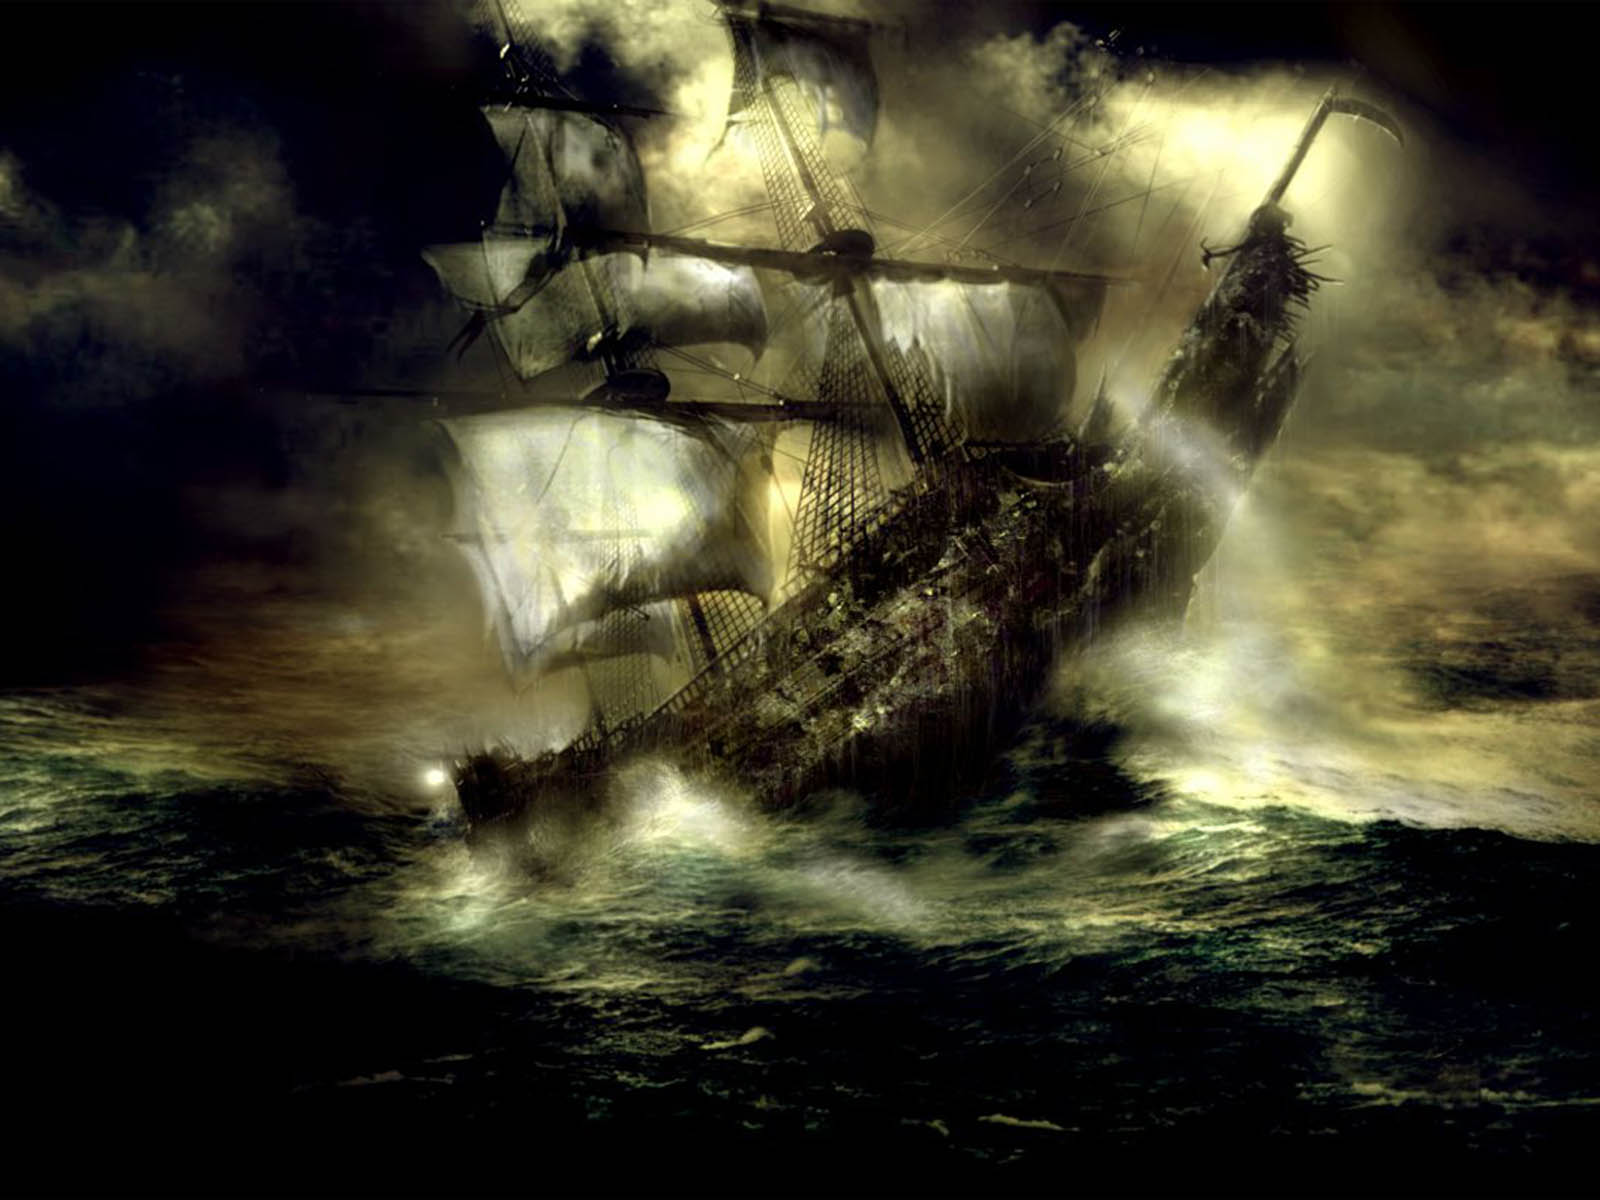 Free download Ghost Ship Wallpaper ghost ship [1600x1200] for your Desktop, Mobile & Tablet. Explore Ghost Pirate Ship Wallpaper. HD Pirate Wallpaper, Pirate Wallpaper for Walls, 3D Pirate Ship Wallpaper